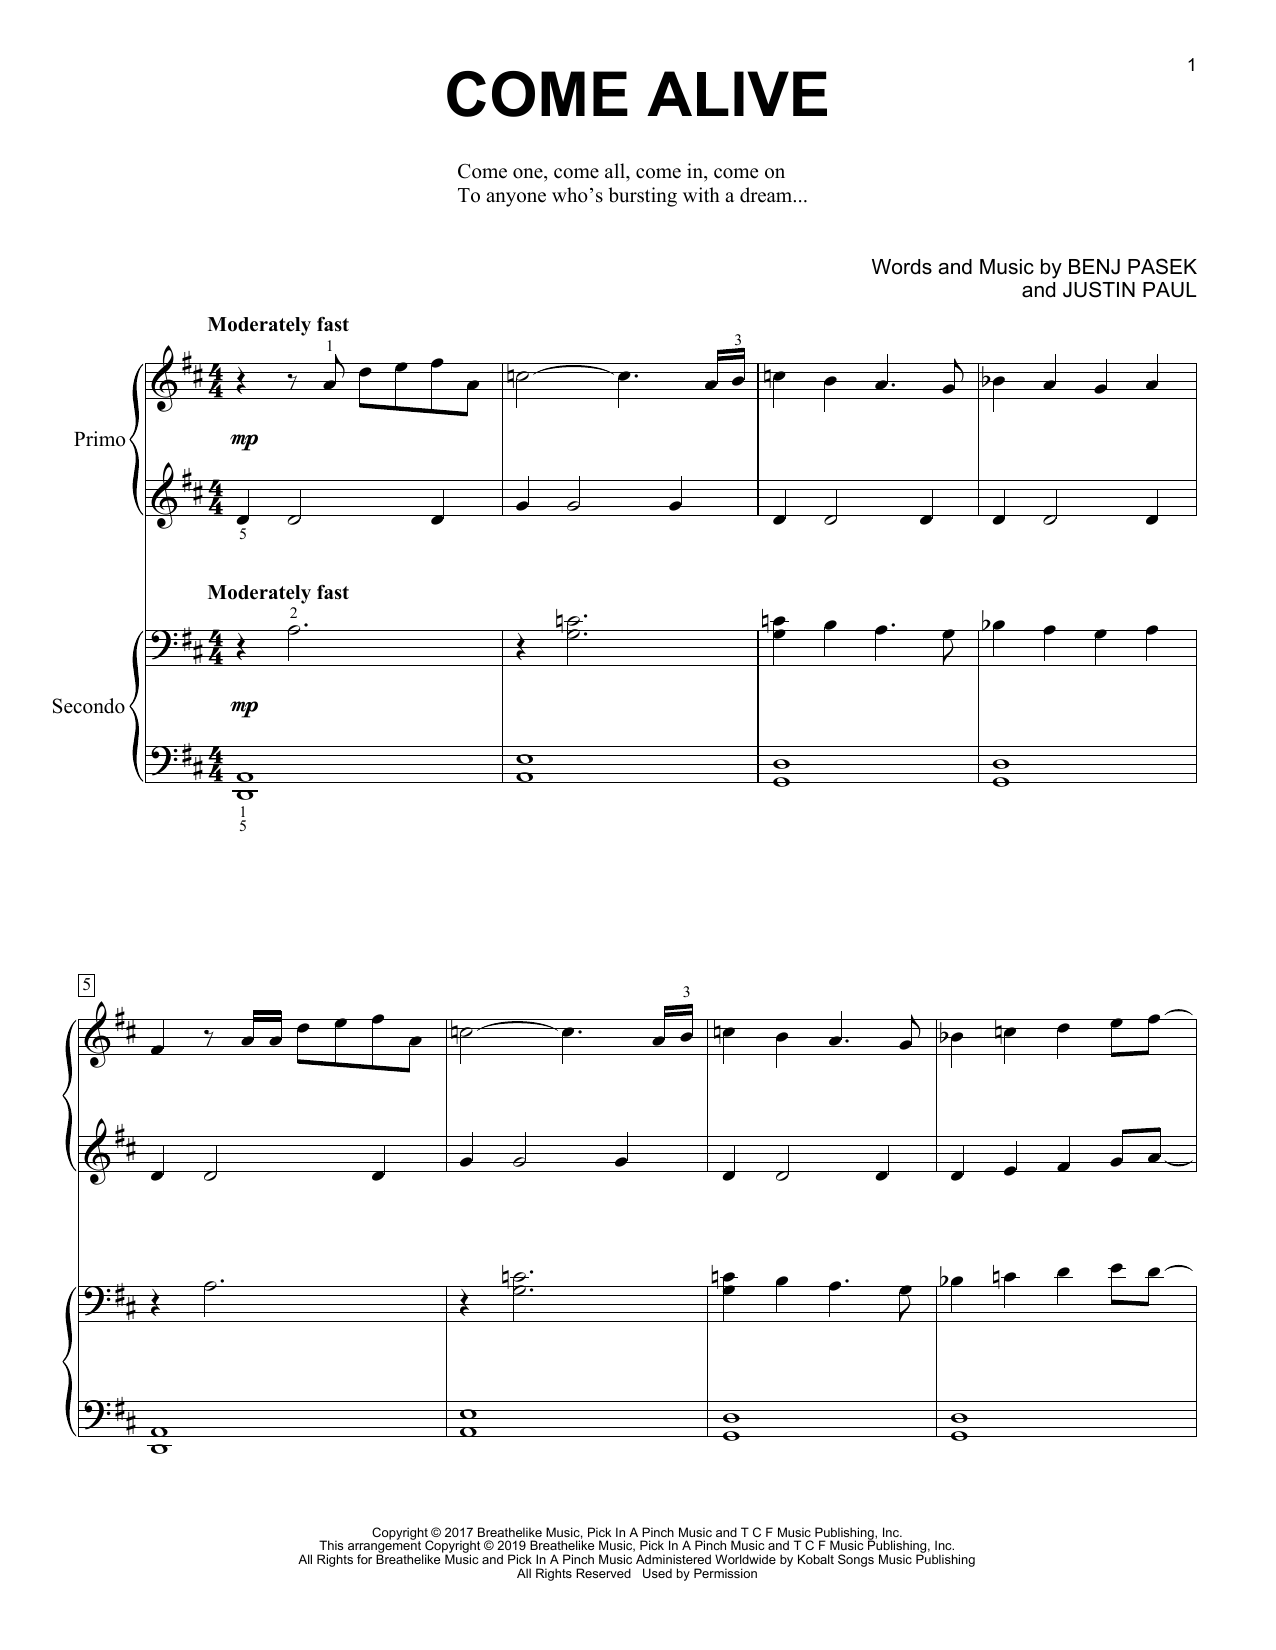 Download Pasek & Paul Come Alive (from The Greatest Showman) Sheet Music